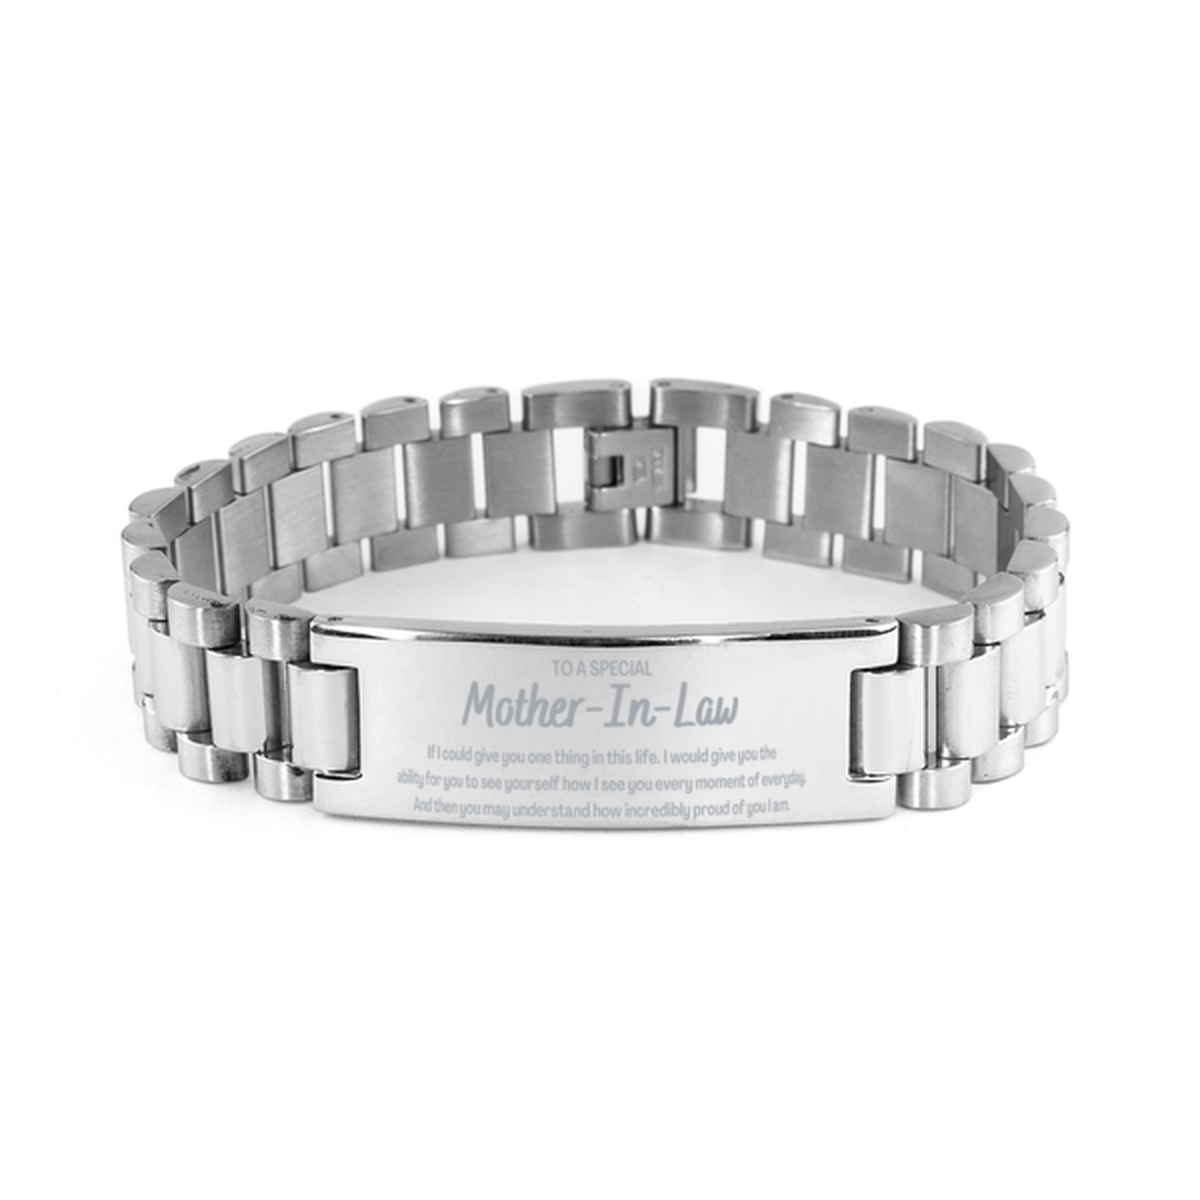 To My Mother-In-Law Ladder Stainless Steel Bracelet, Gifts For Mother-In-Law Engraved, Inspirational Gifts for Christmas Birthday, Epic Gifts for Mother-In-Law To A Special Mother-In-Law how incredibly proud of you I am